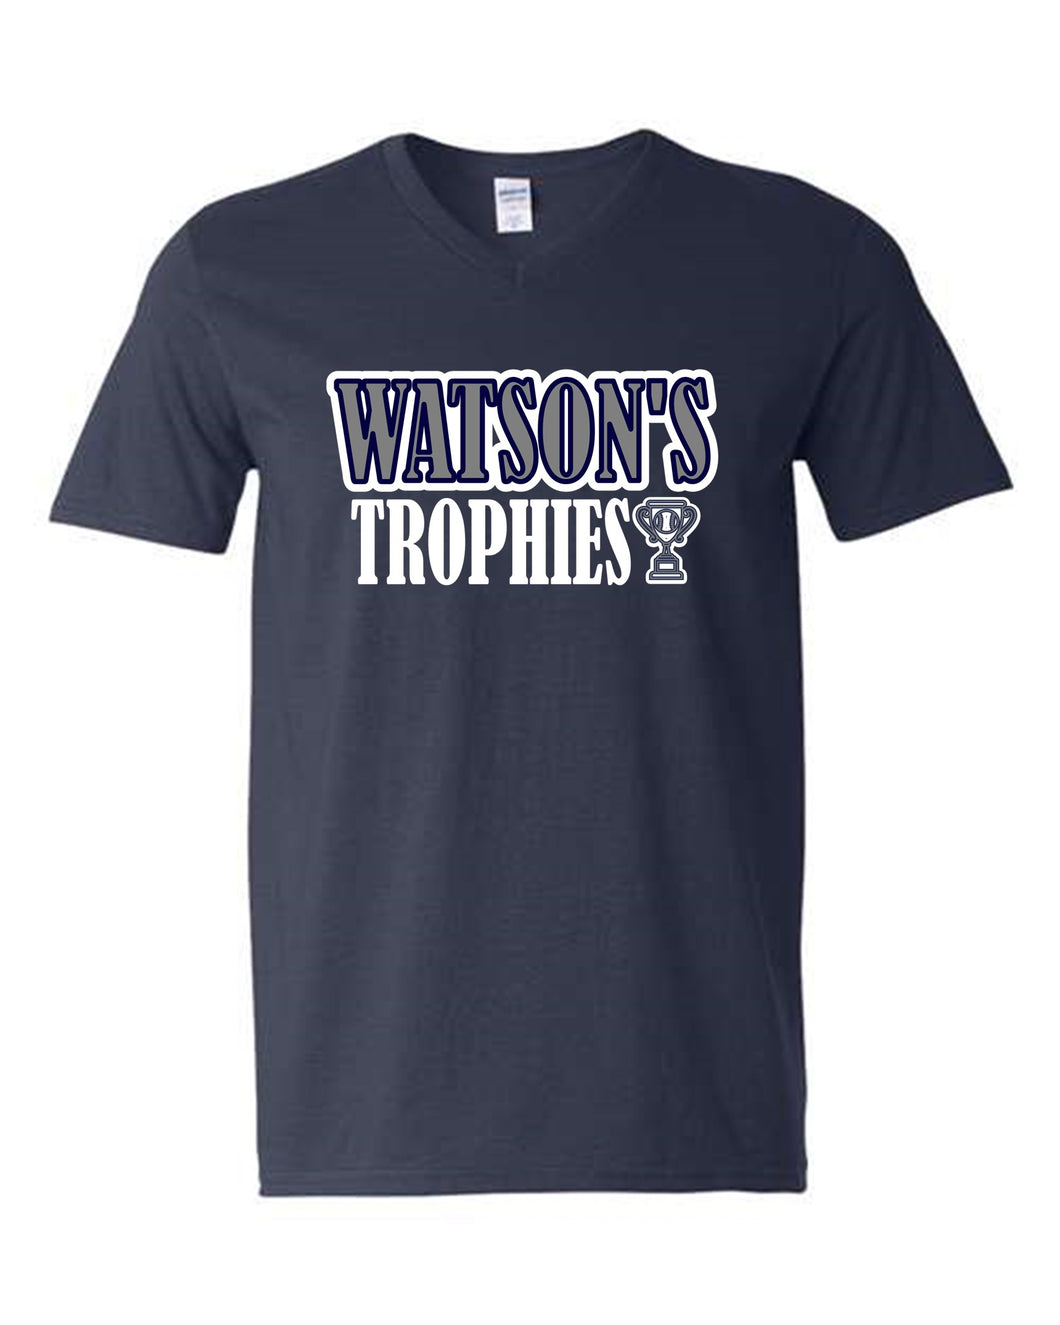 Watson's Trophies V-Neck Short Sleeve - Adult Sizes Only